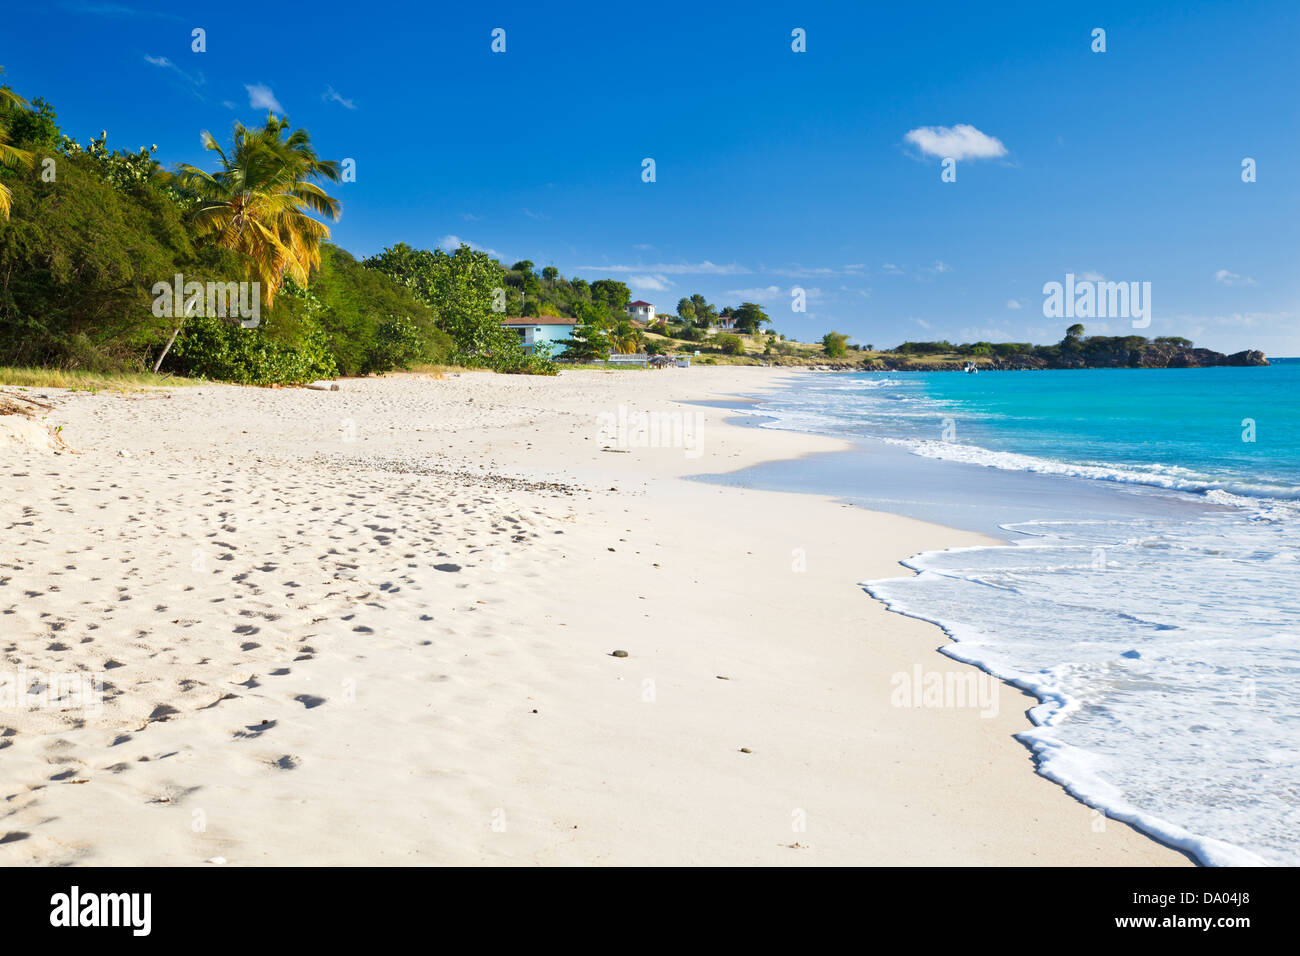 Perfect white caribbean beach with a palm tree and turquoise sea. Turners Beach, Antigua. Stock Photo